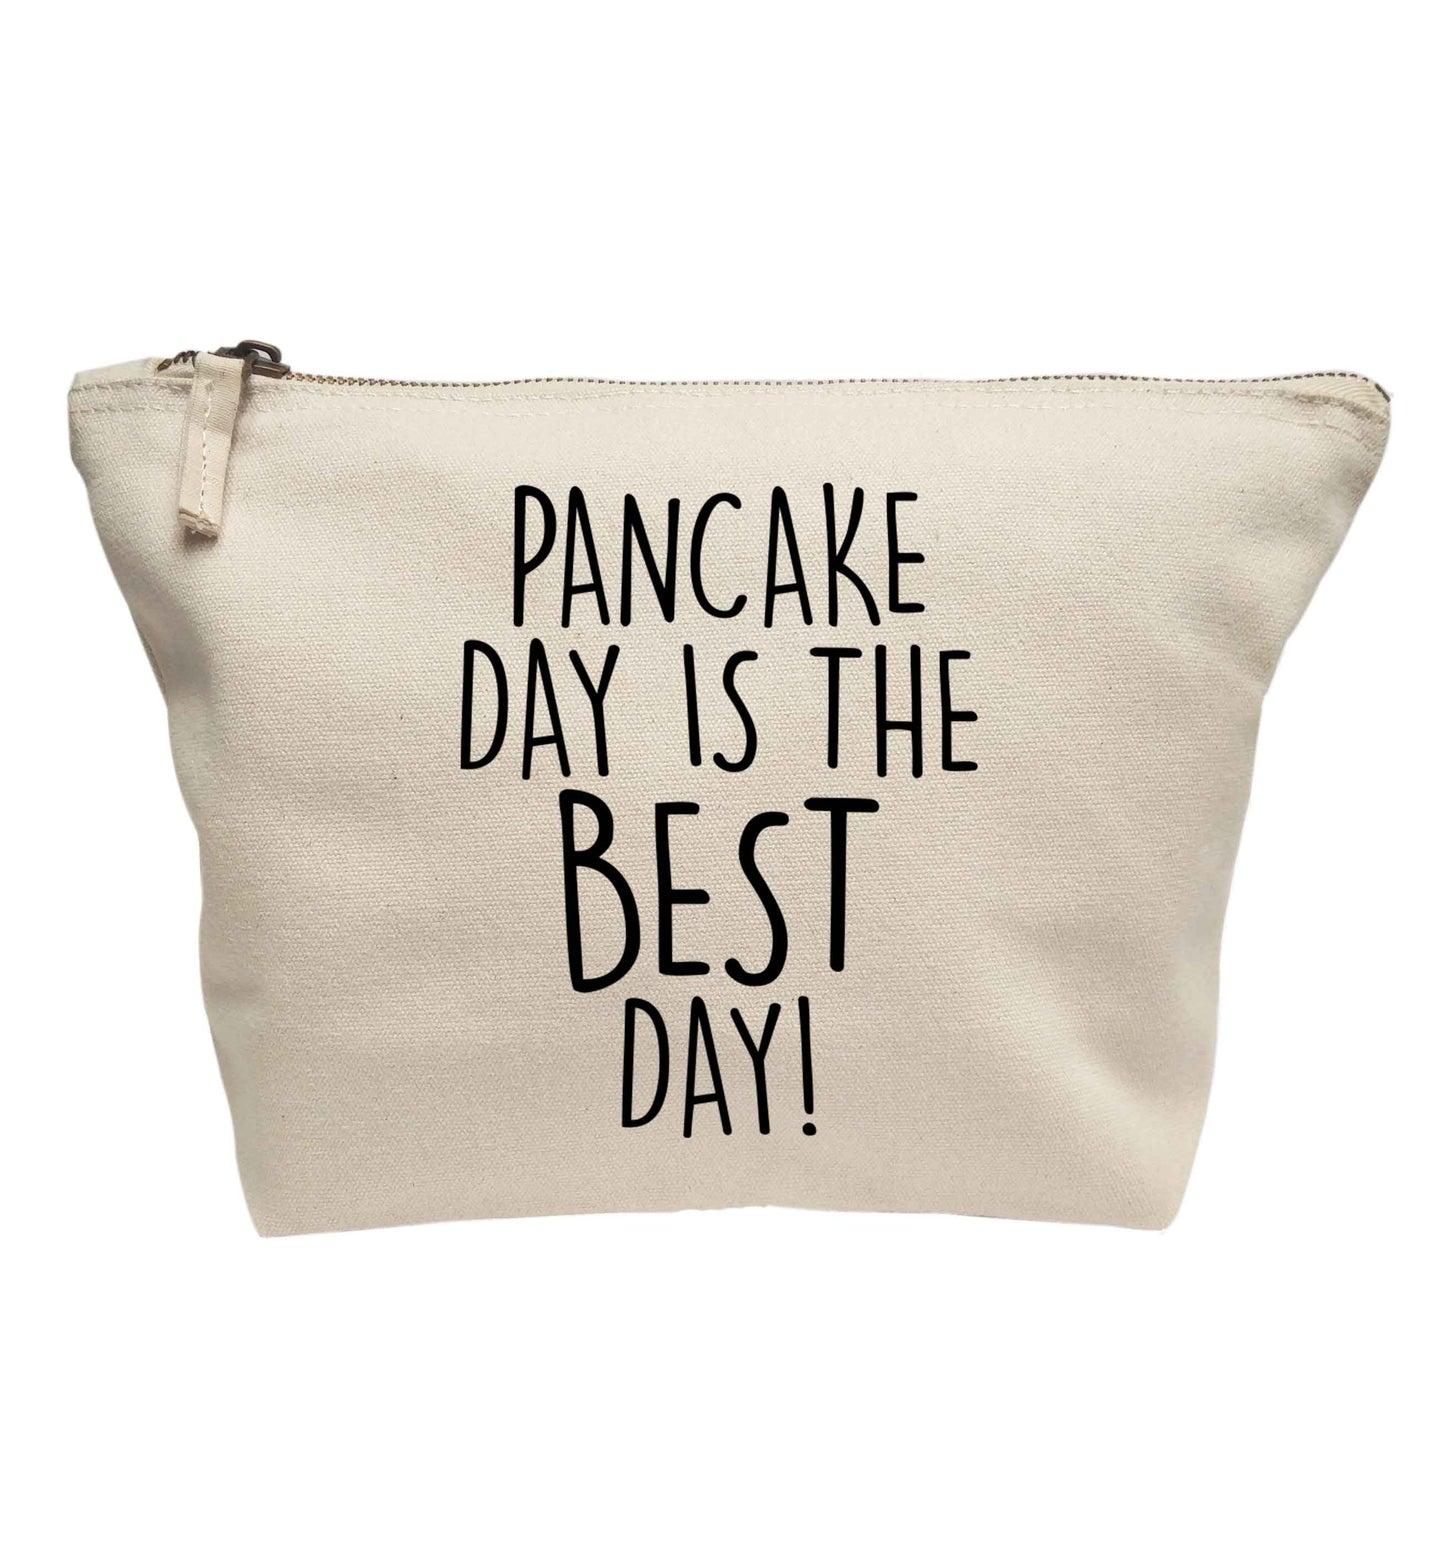 Pancake day is the best day | Makeup / wash bag